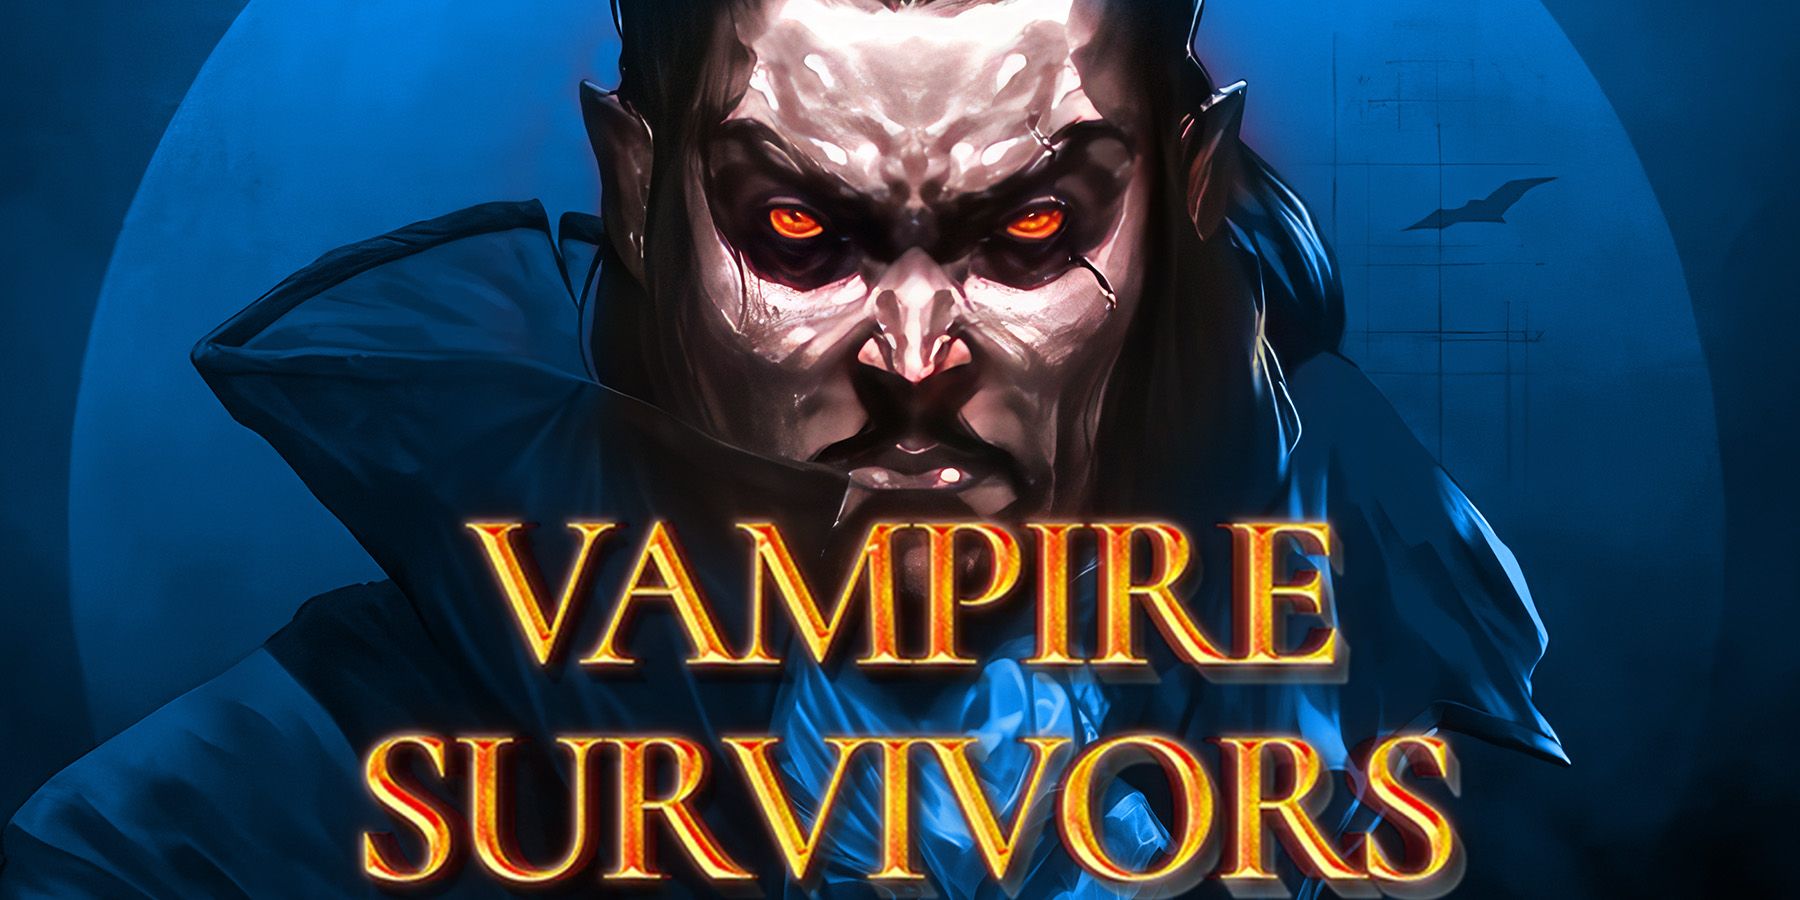 Vampire Survivors upscaled cover with blue filter and game logo